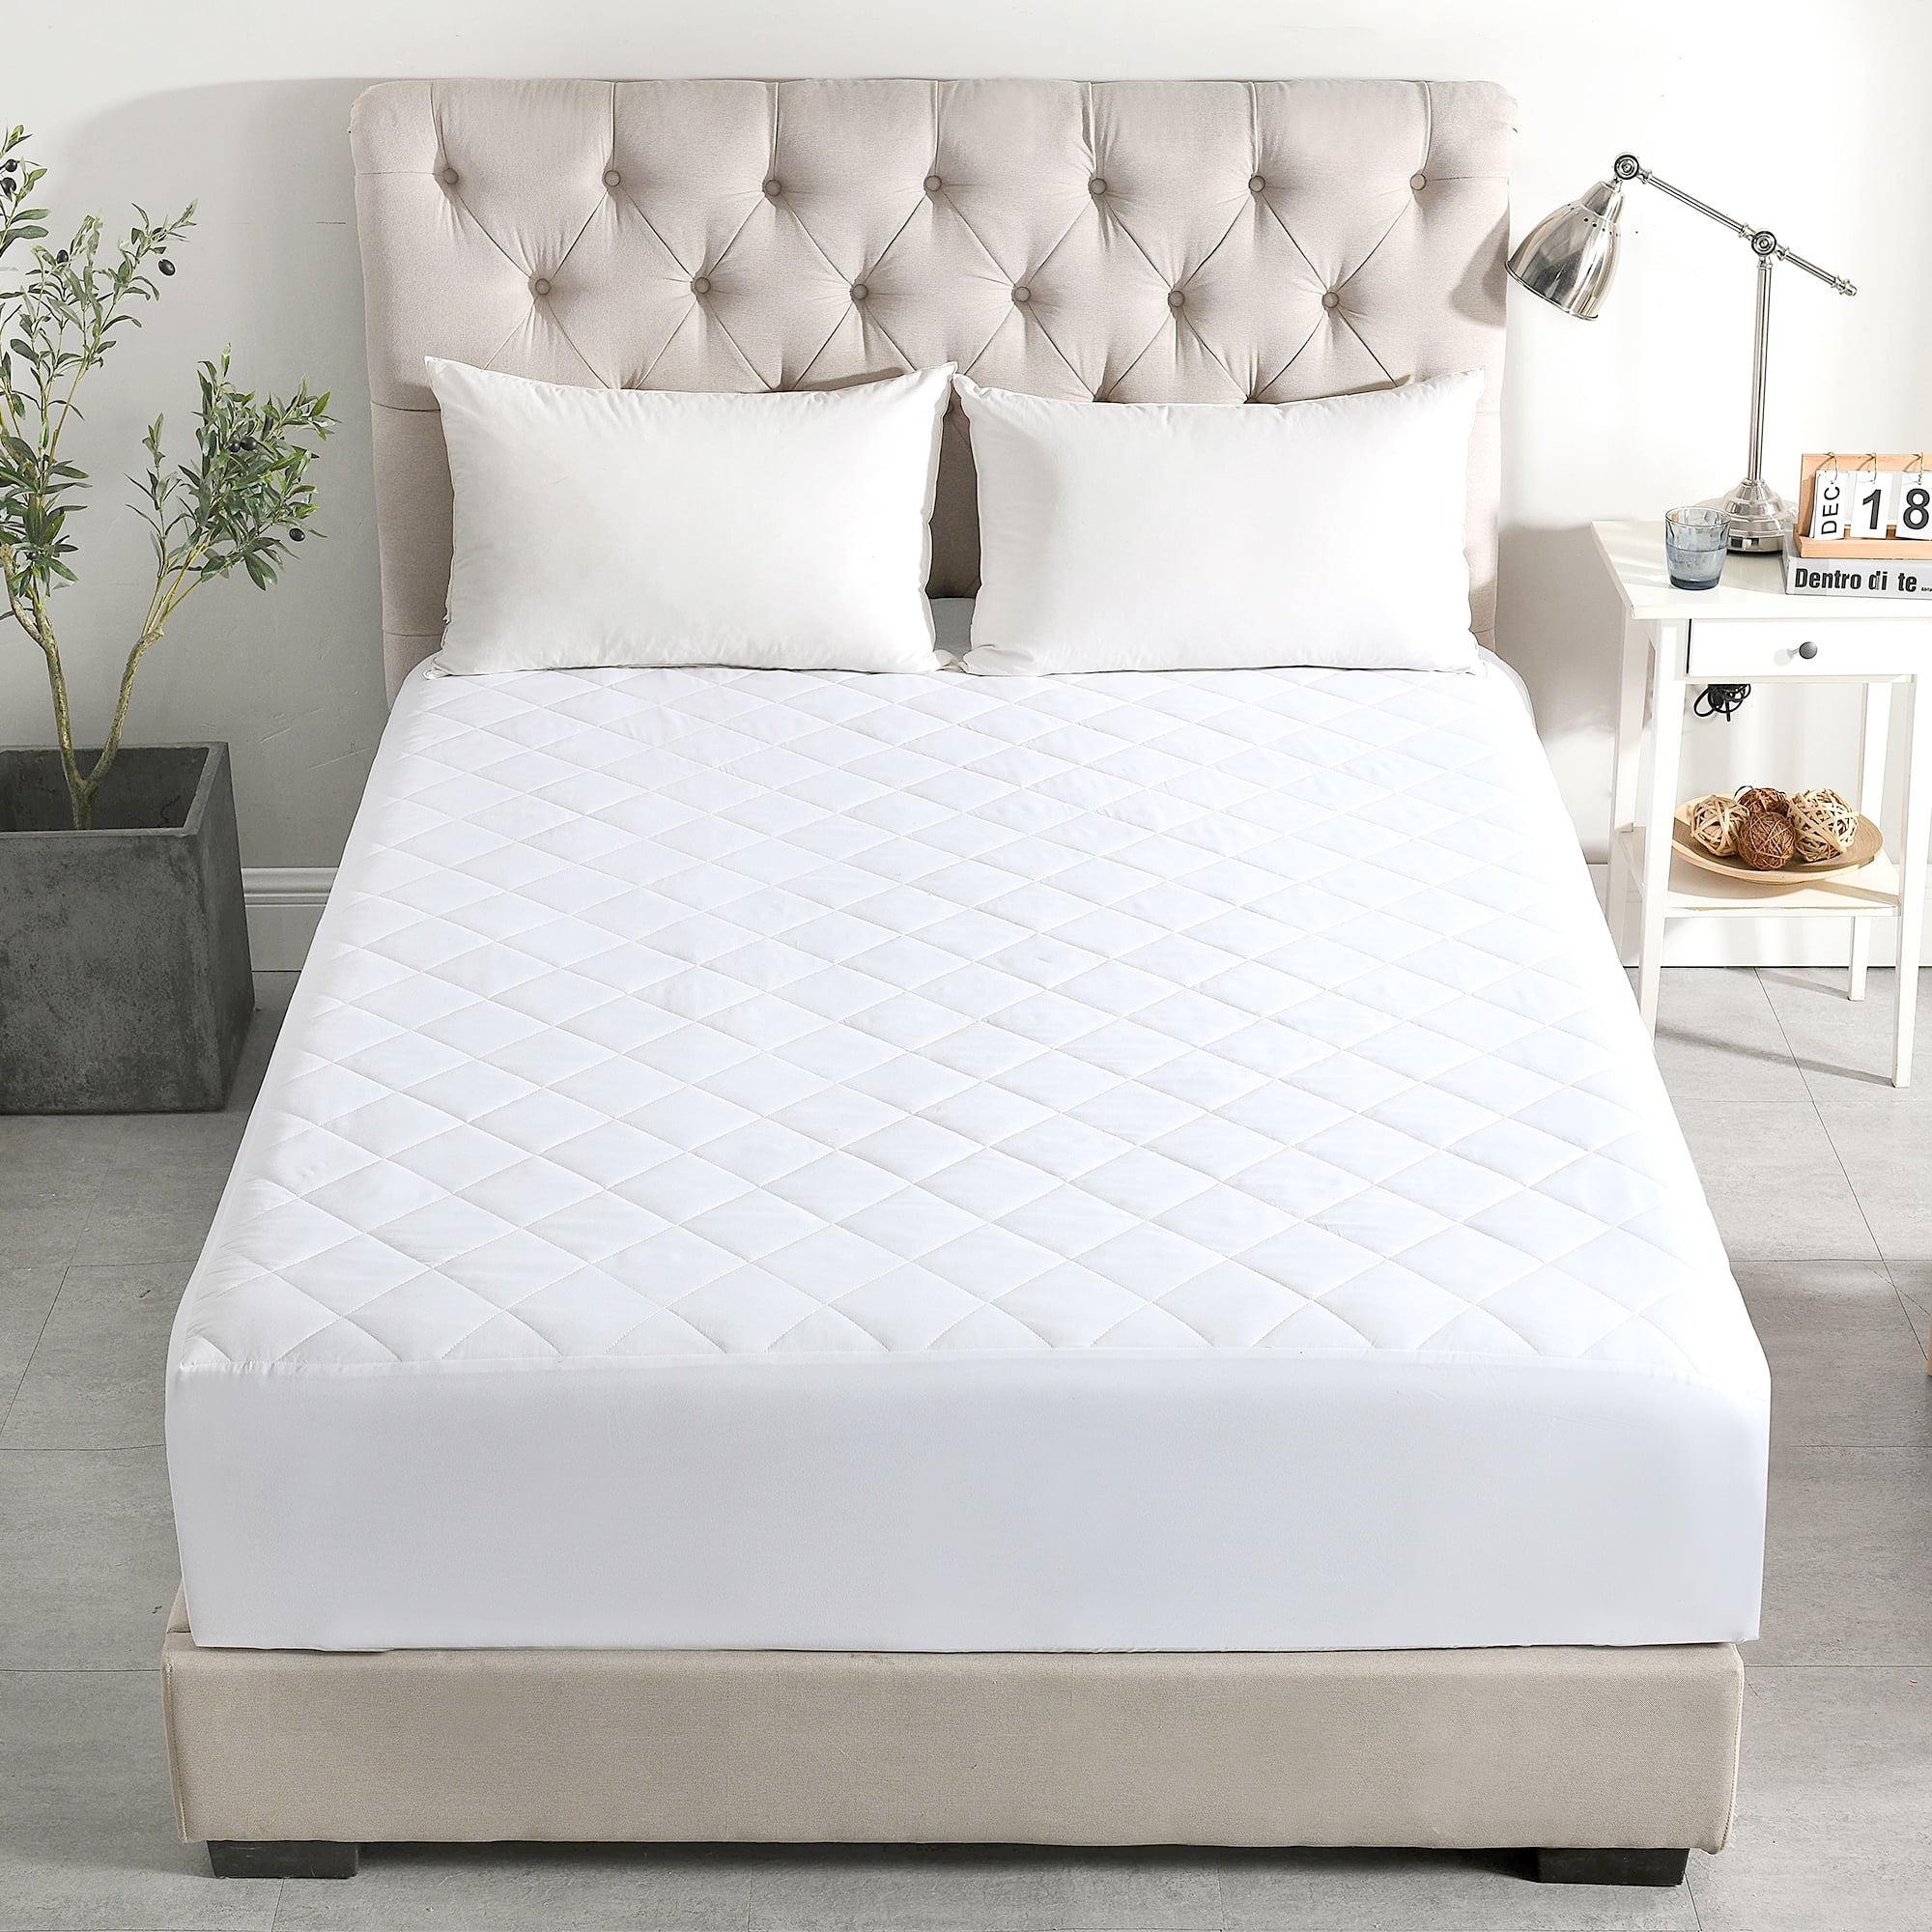 Extra Deep 30cm Quilted Fitted Mattress Covers All Sizes Great Value For Money! 